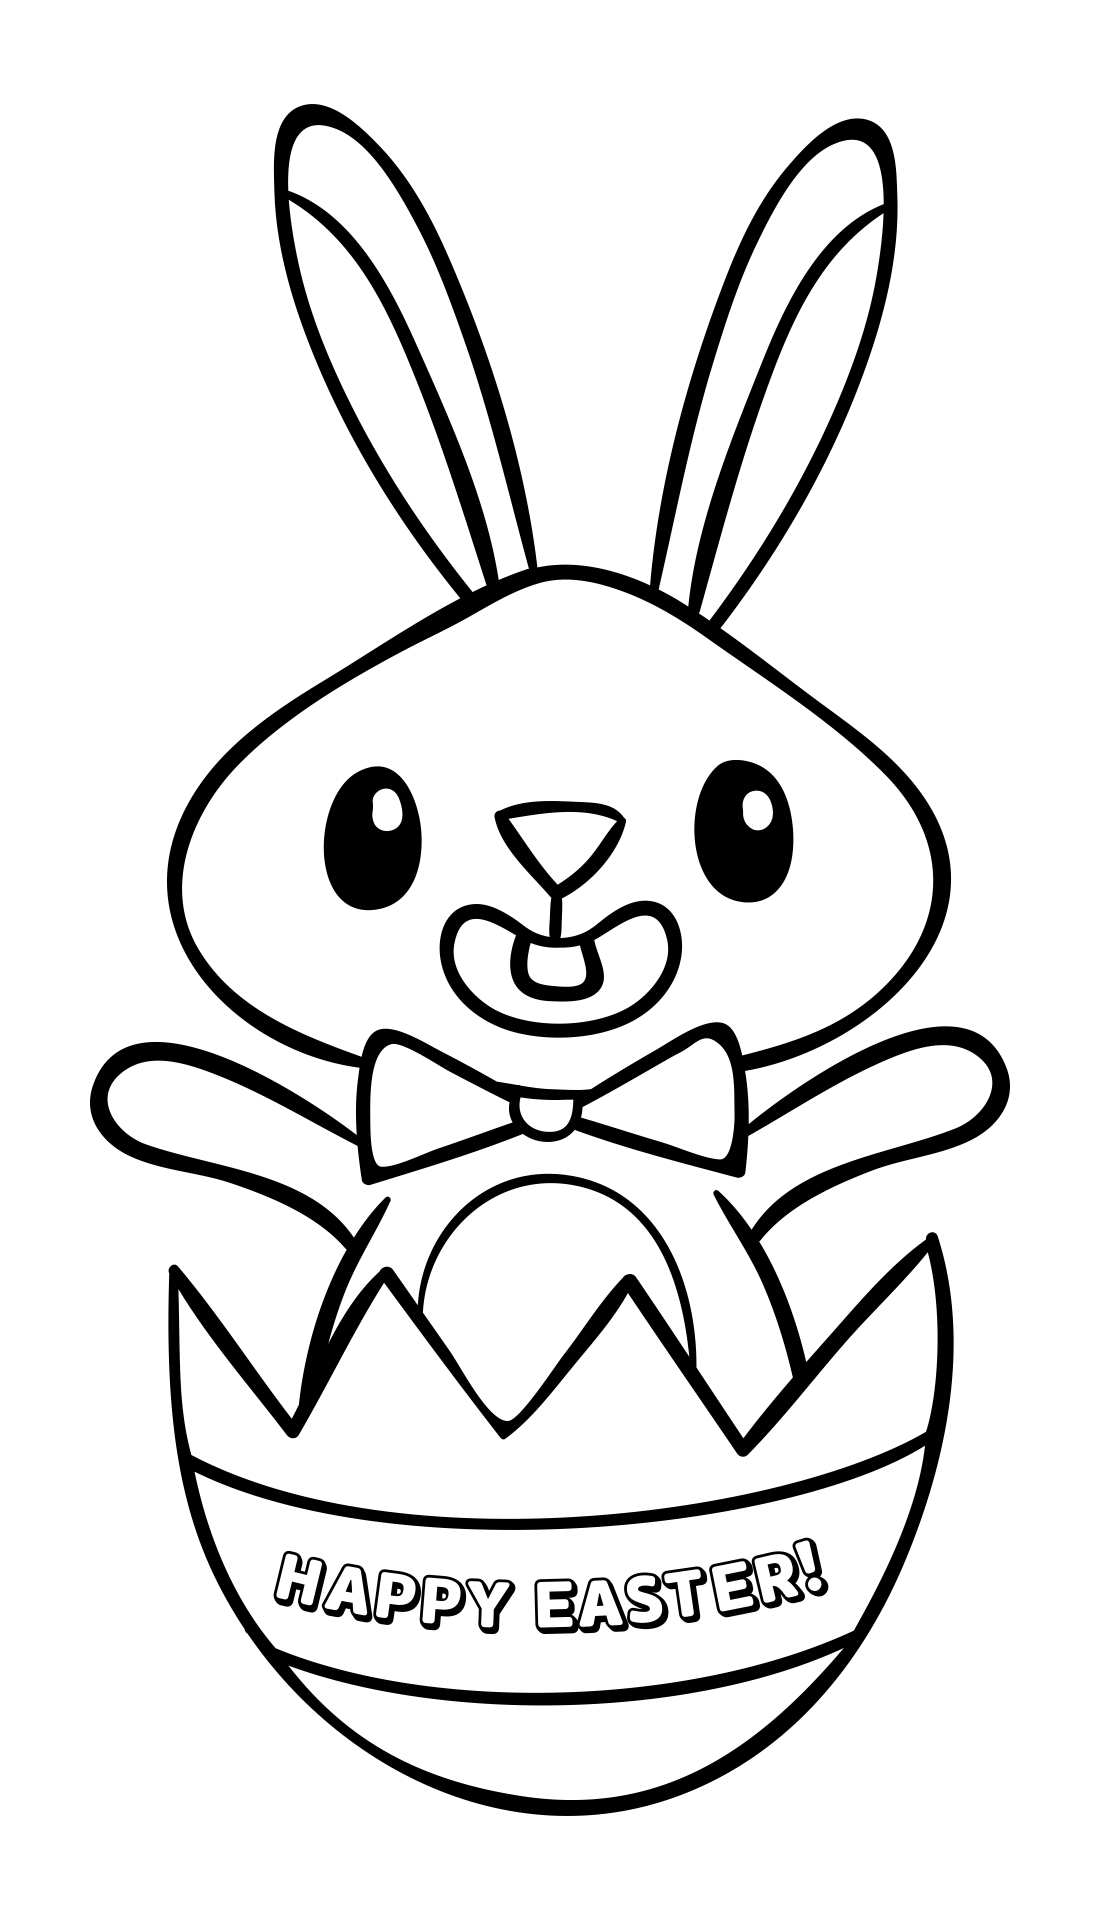 Coloring Page Printable Easter Bunny Template